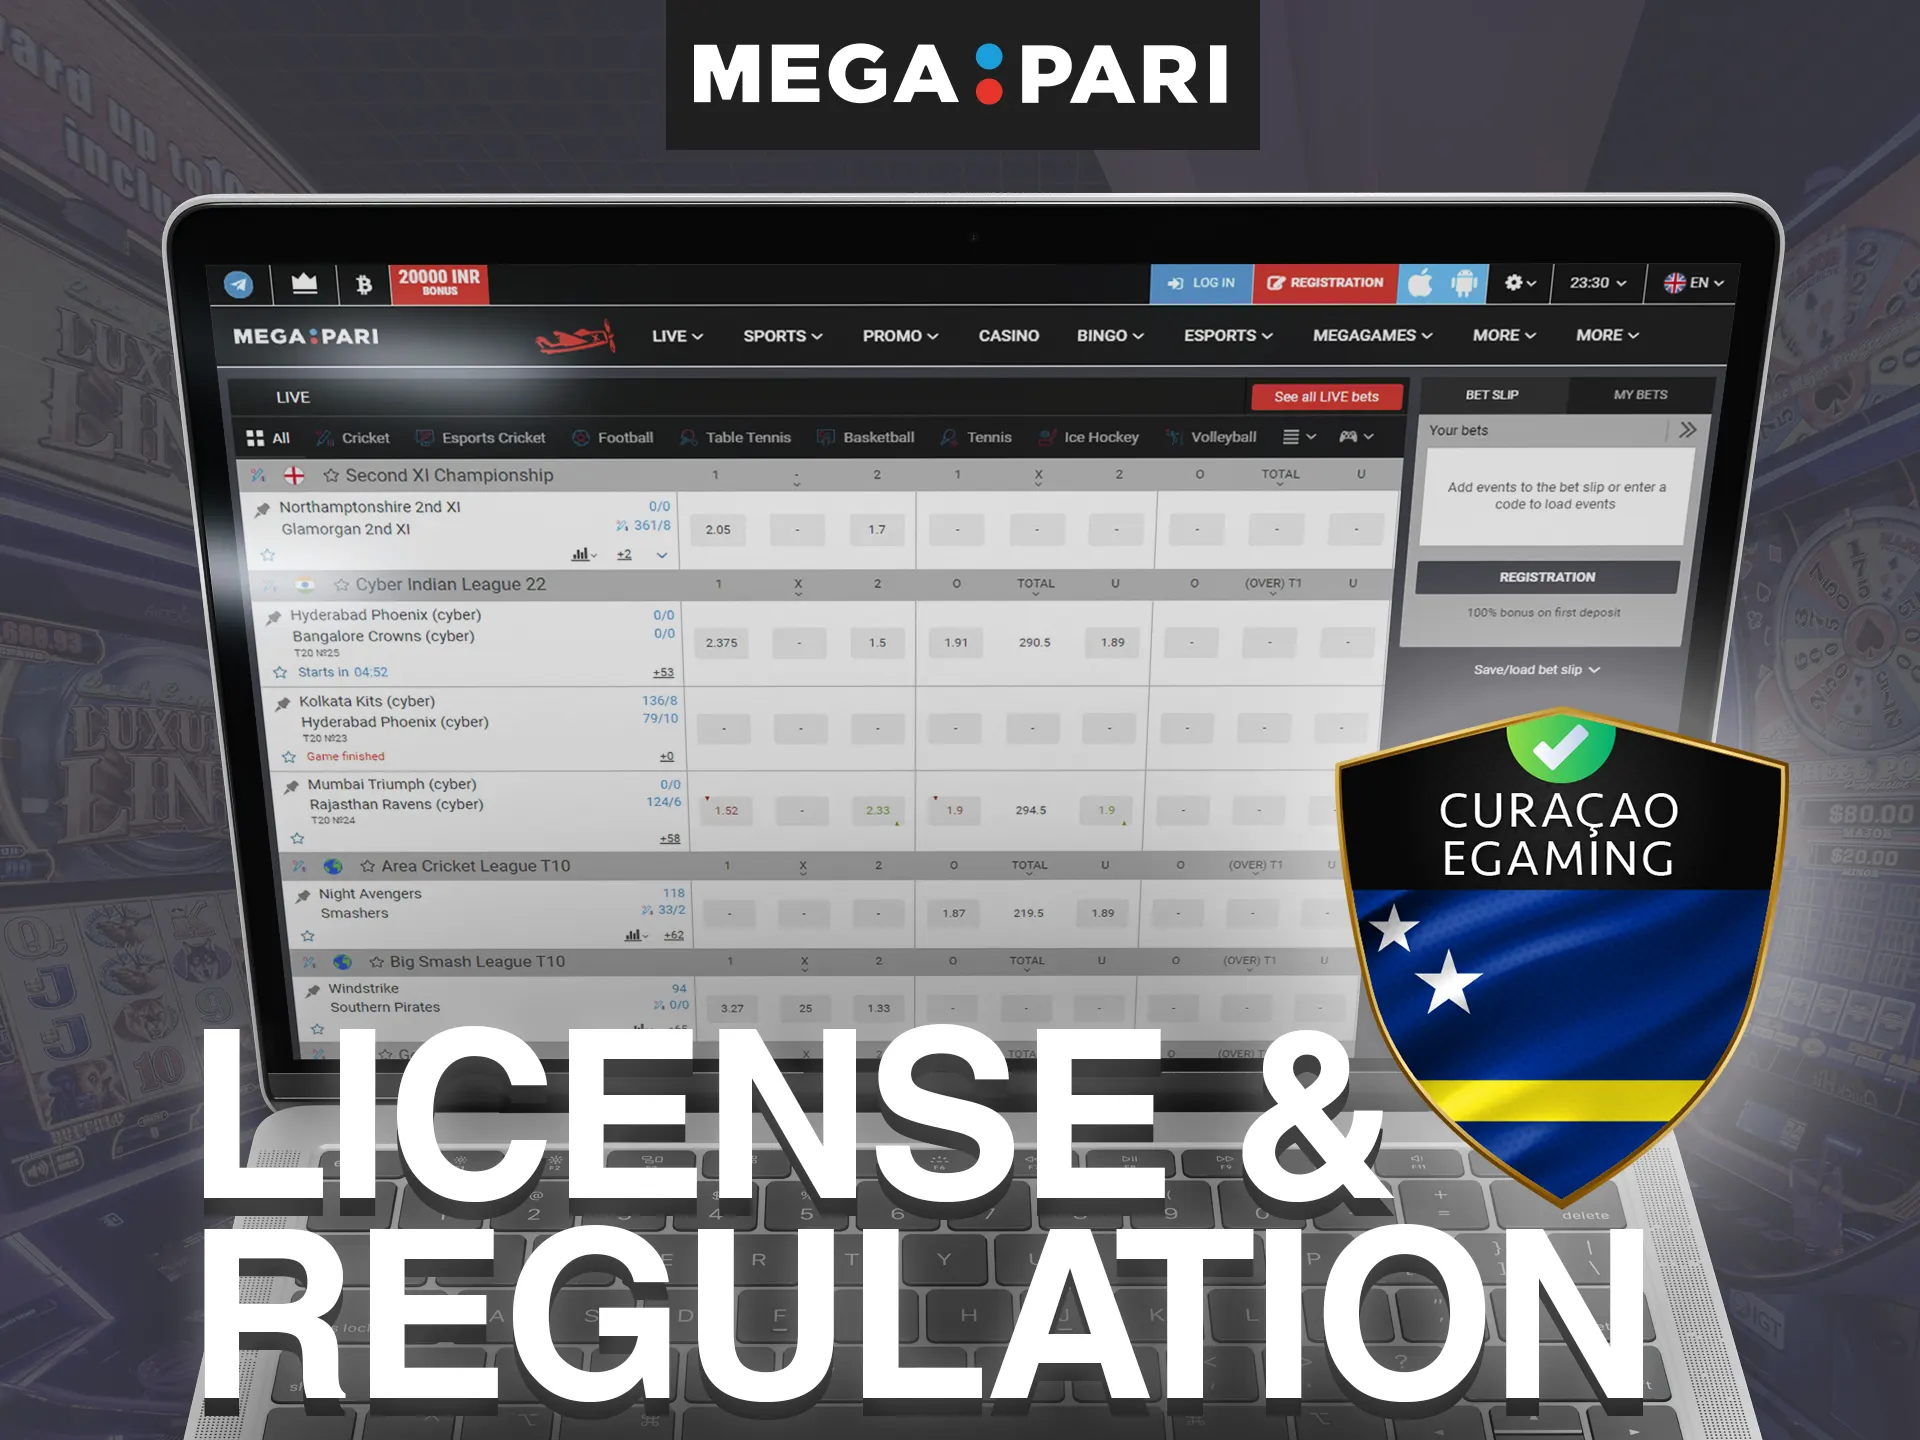 Megapari holds a license from Curaсao.